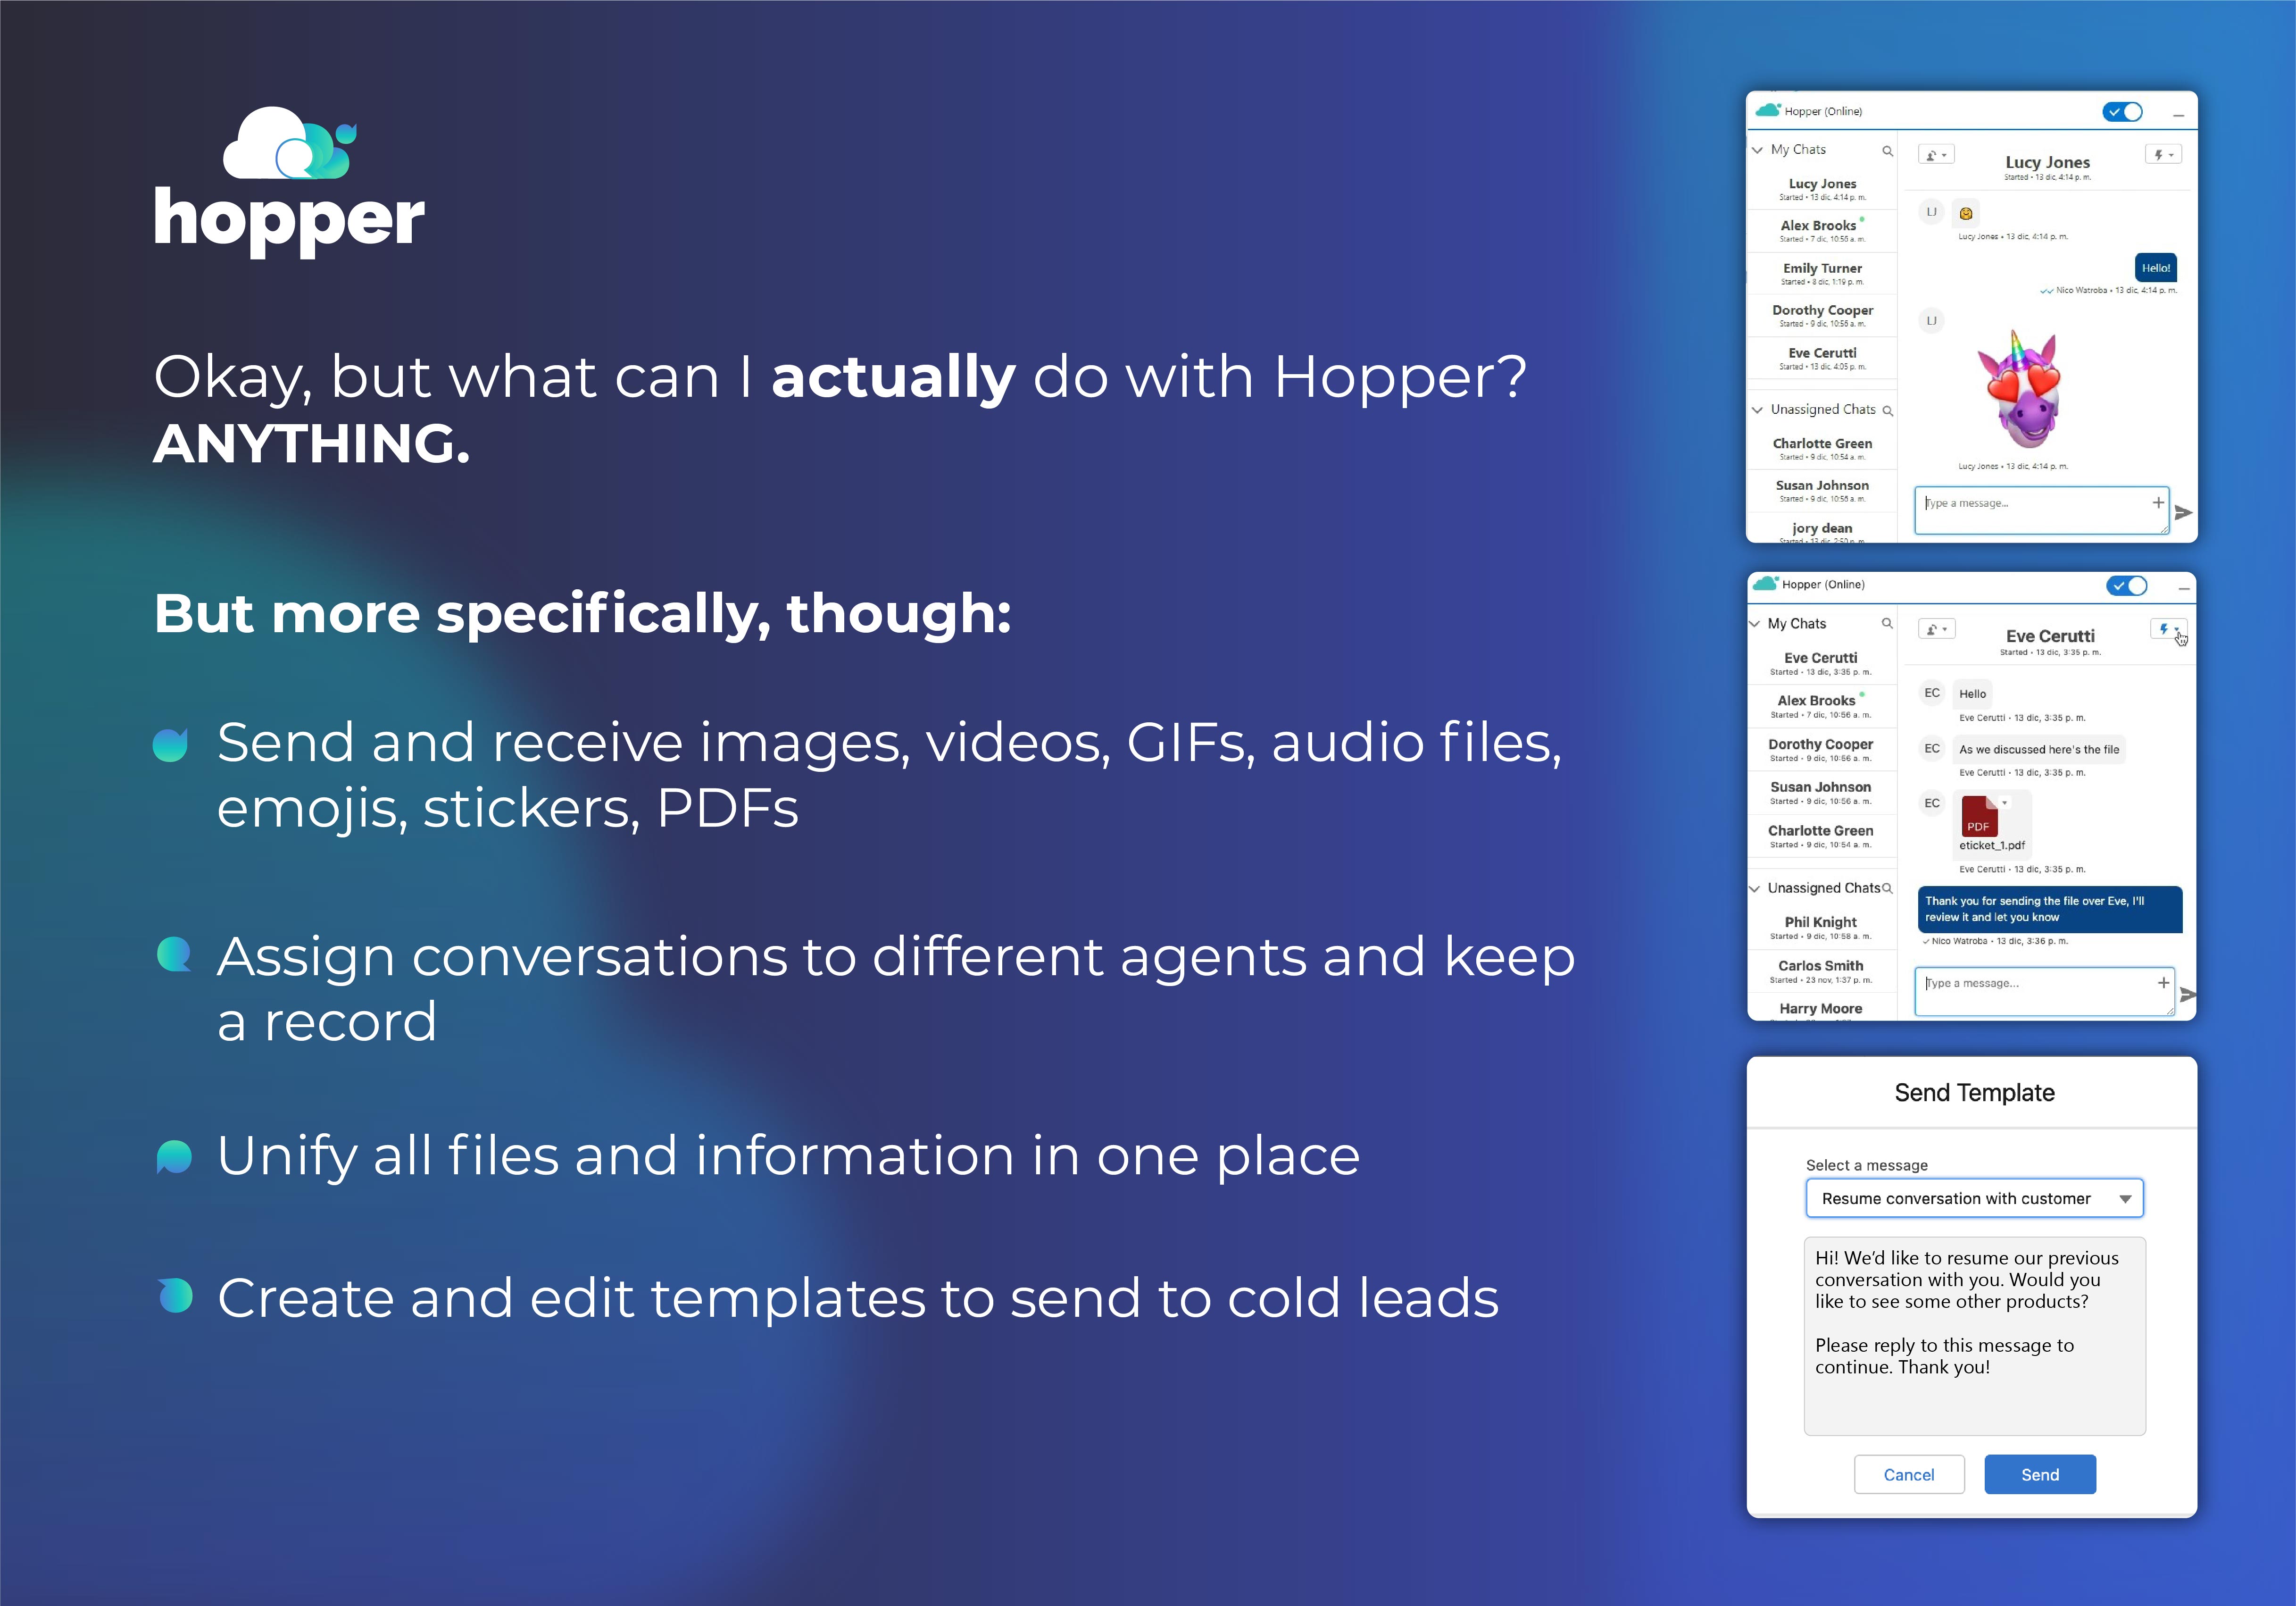 These are some of our the core functionalities you can do with Hopper.